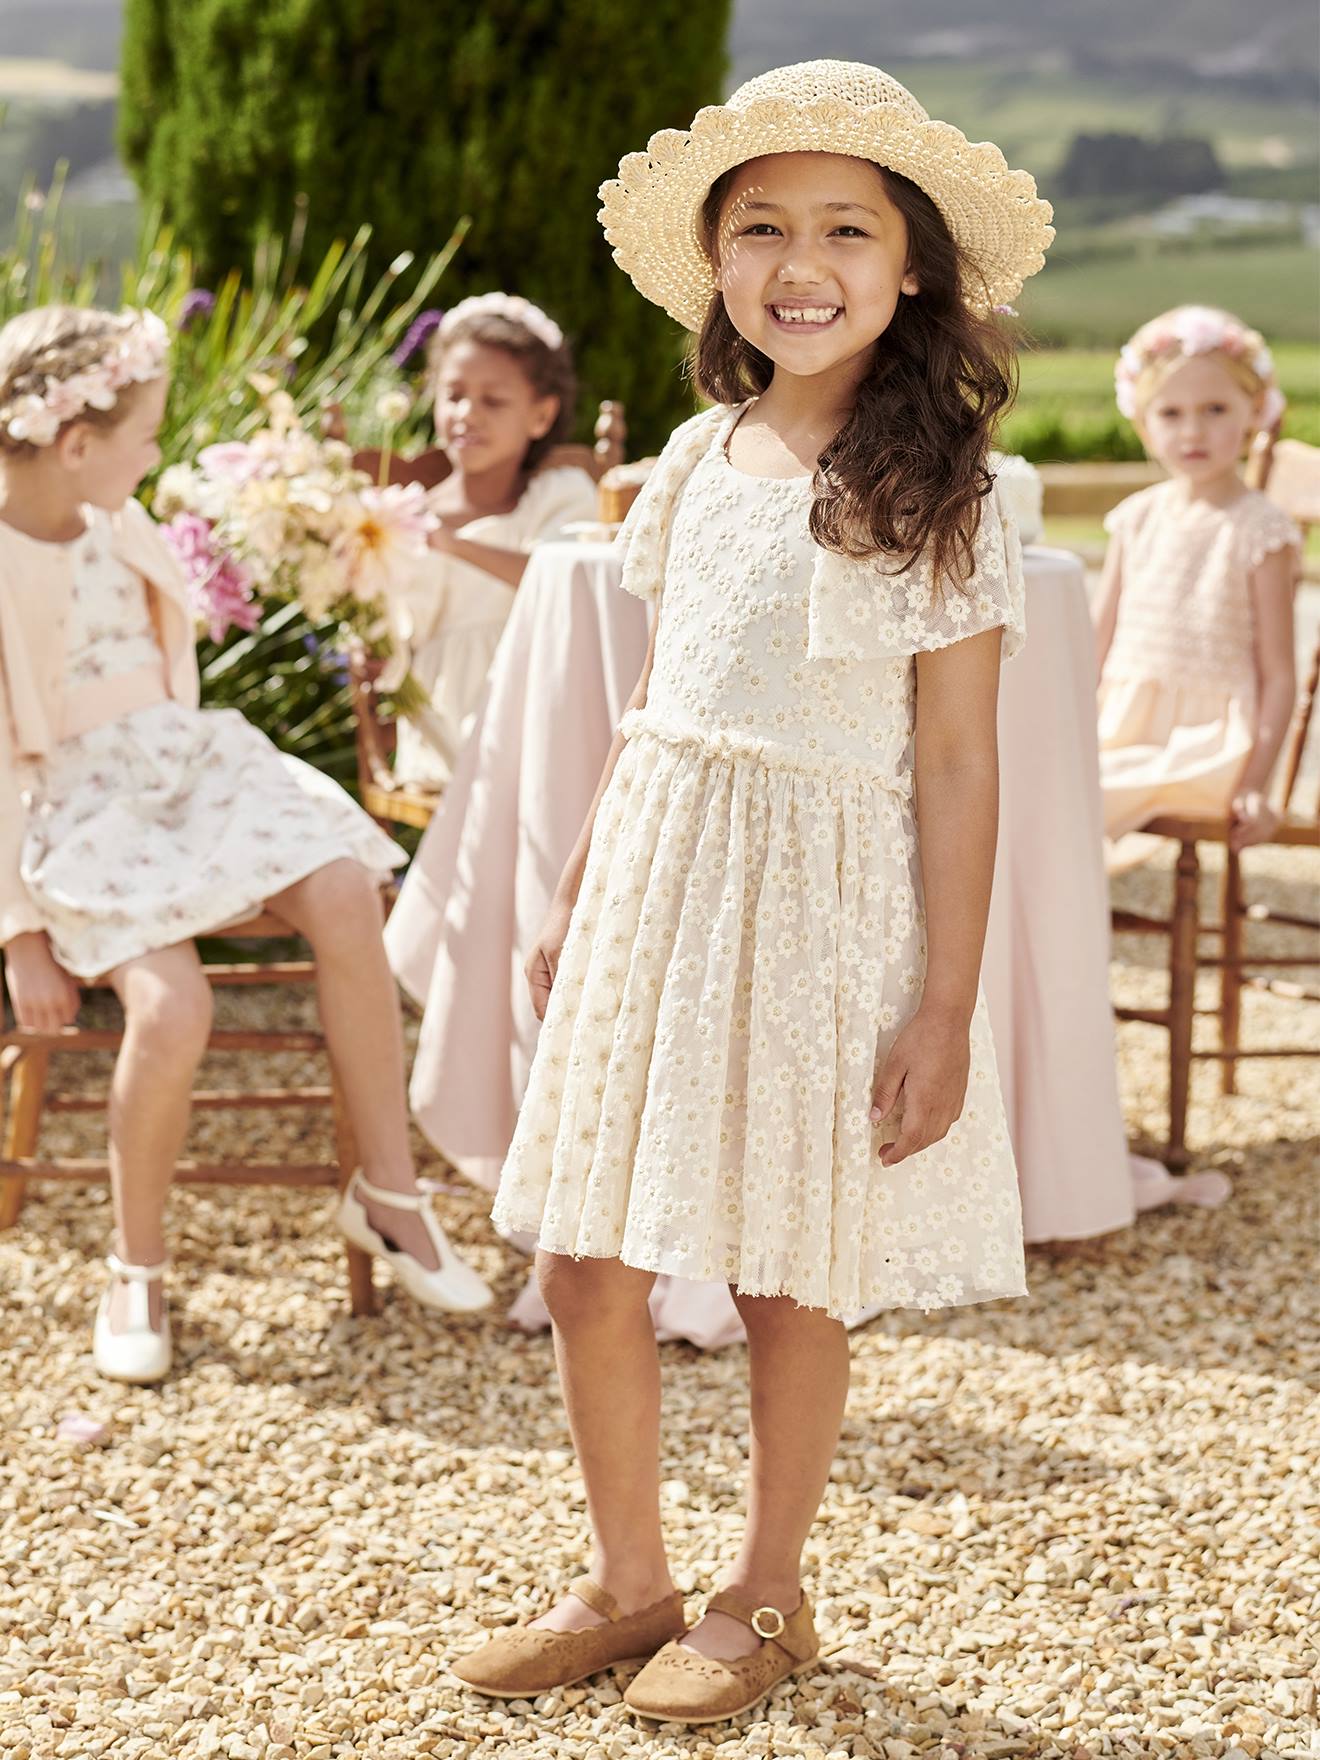 Occasion Wear Dress in Tulle with Embroidered Flowers for Girls vanilla